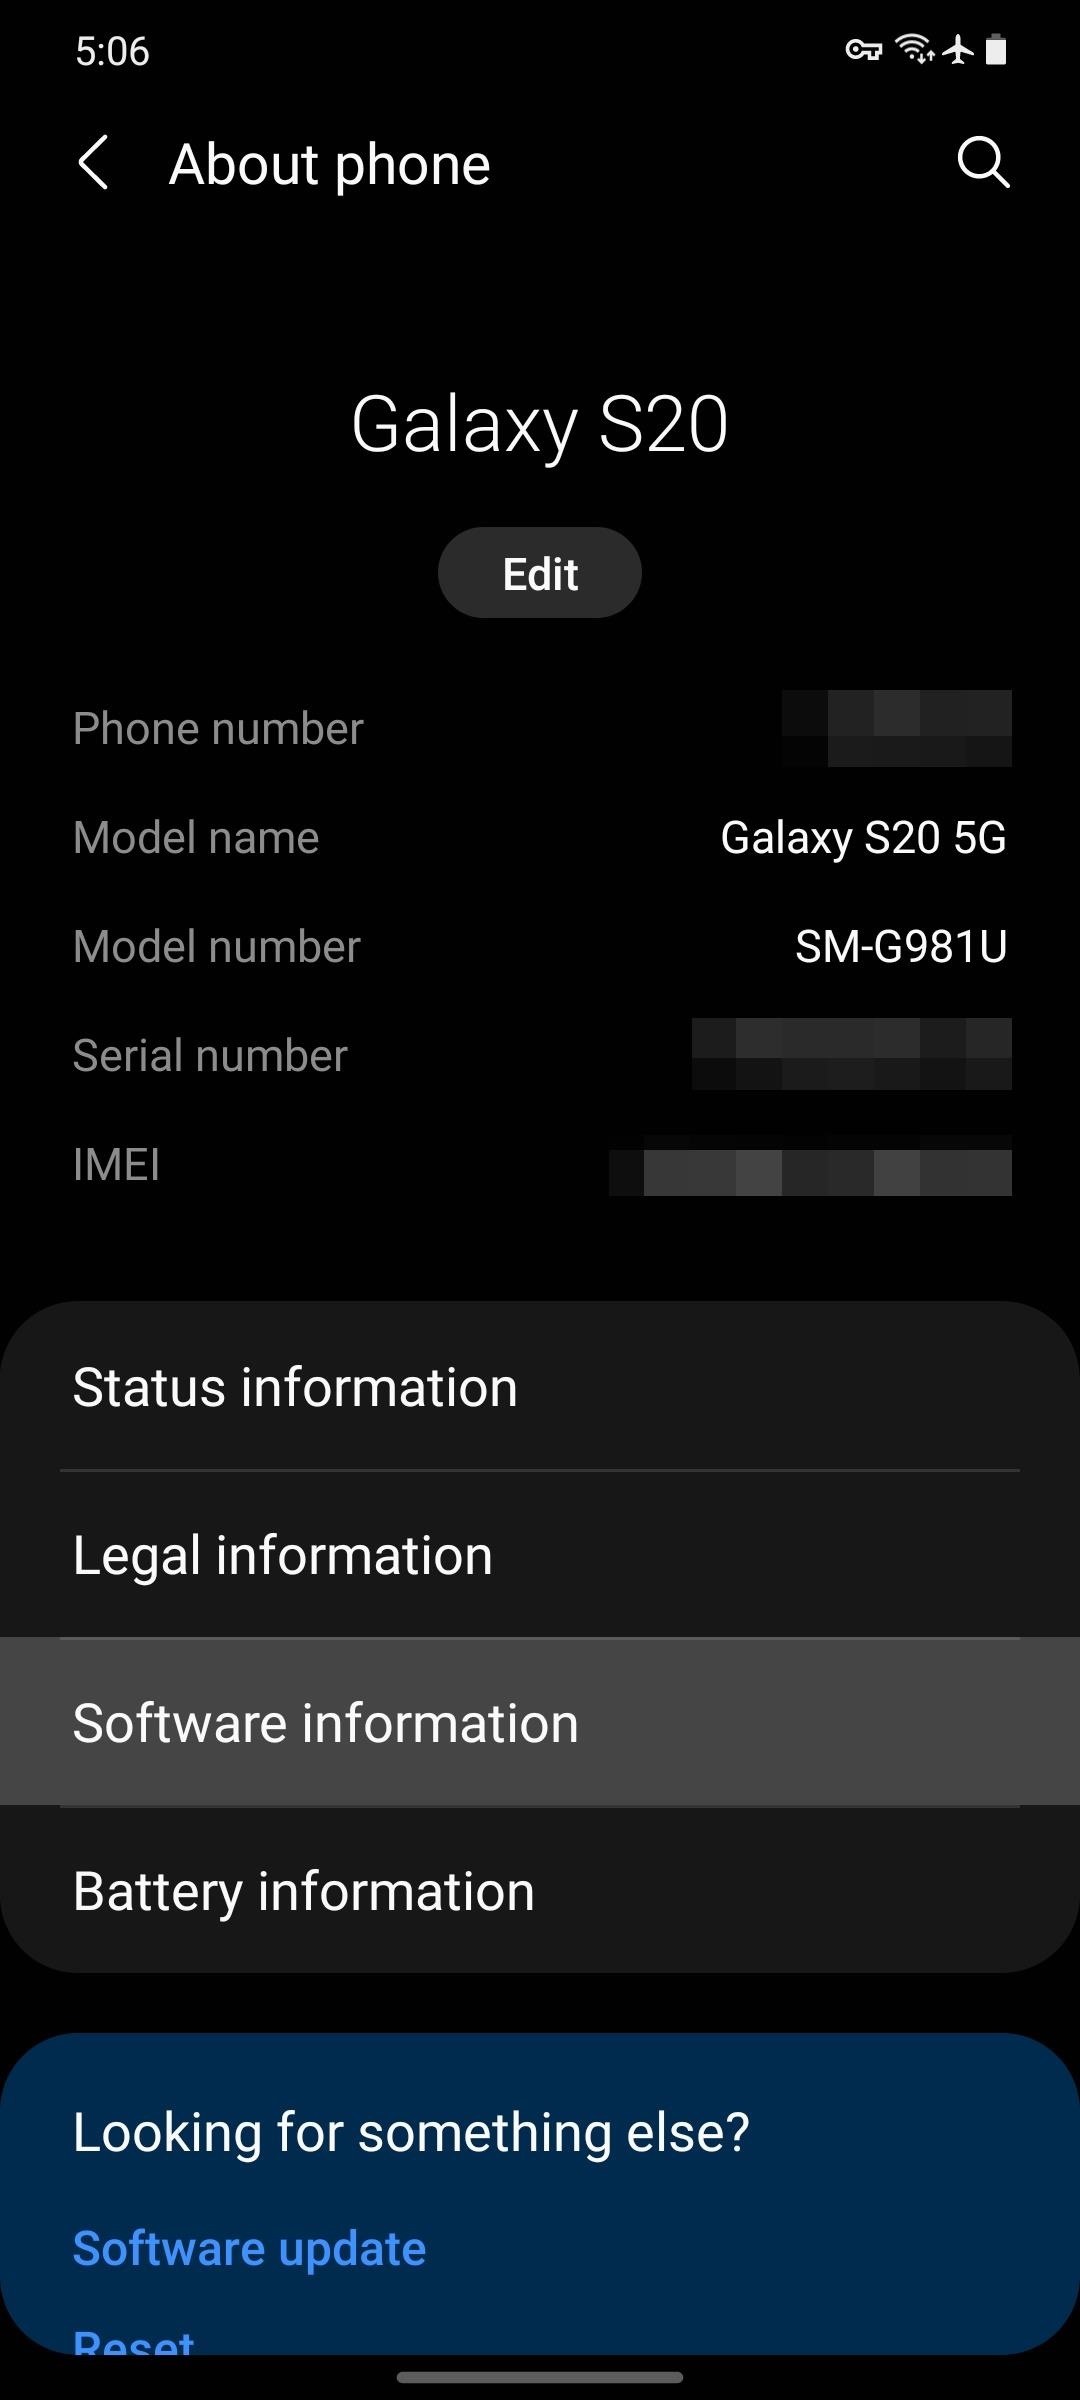 How to Use Wireless ADB in Samsung's One UI 3.0 (It's Actually Pretty Easy)